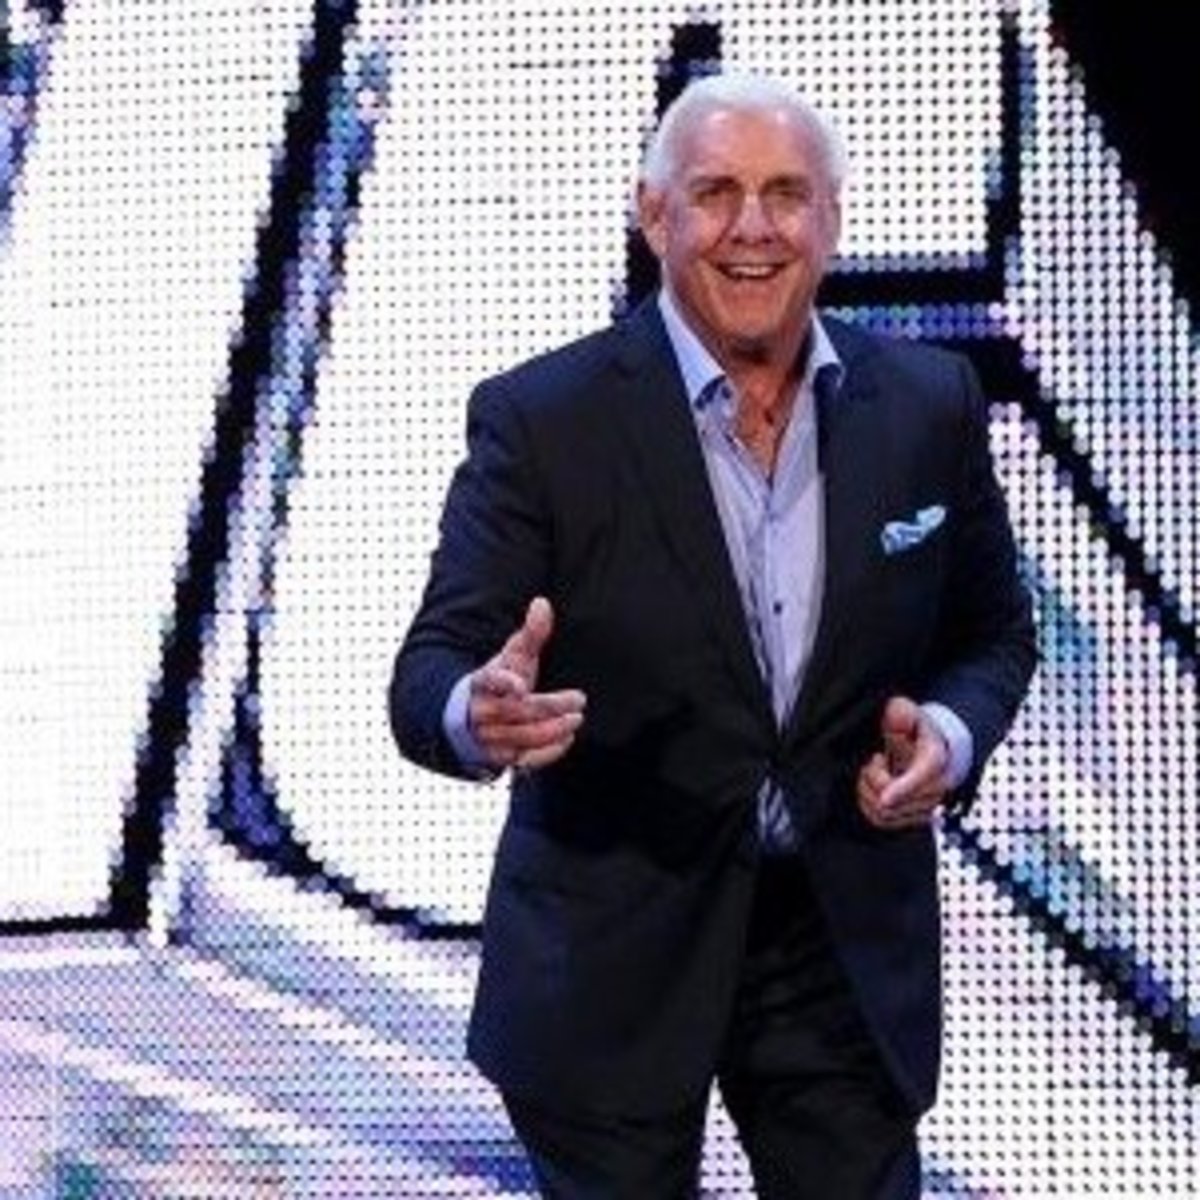 Ric Flair seen at a WWE event.